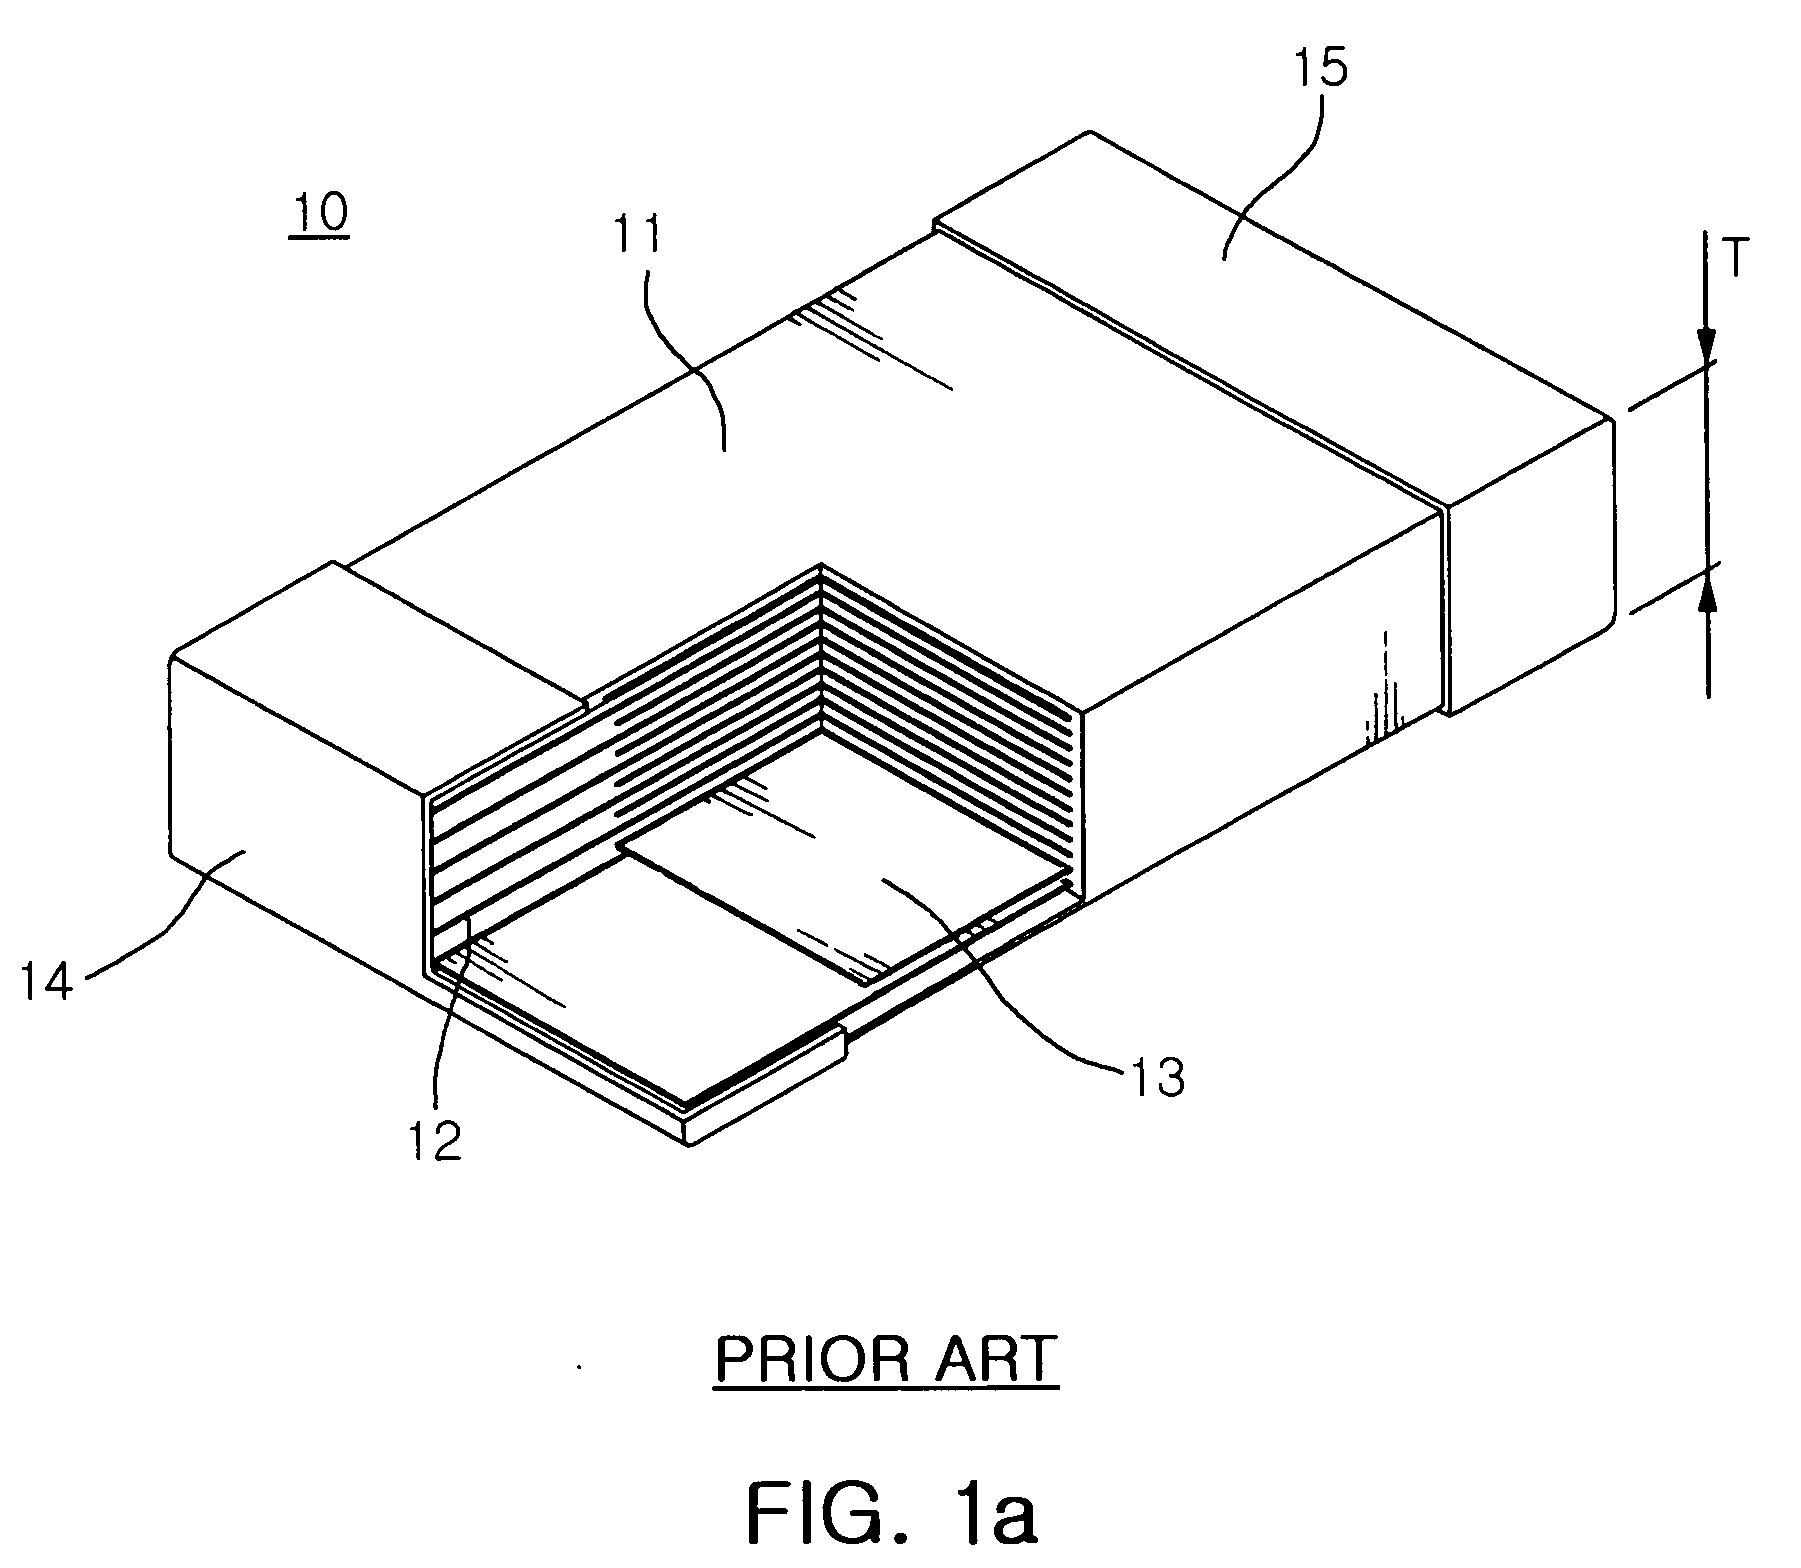 Multilayered chip capacitor and printed circuit board having embedded multilayered chip capacitor